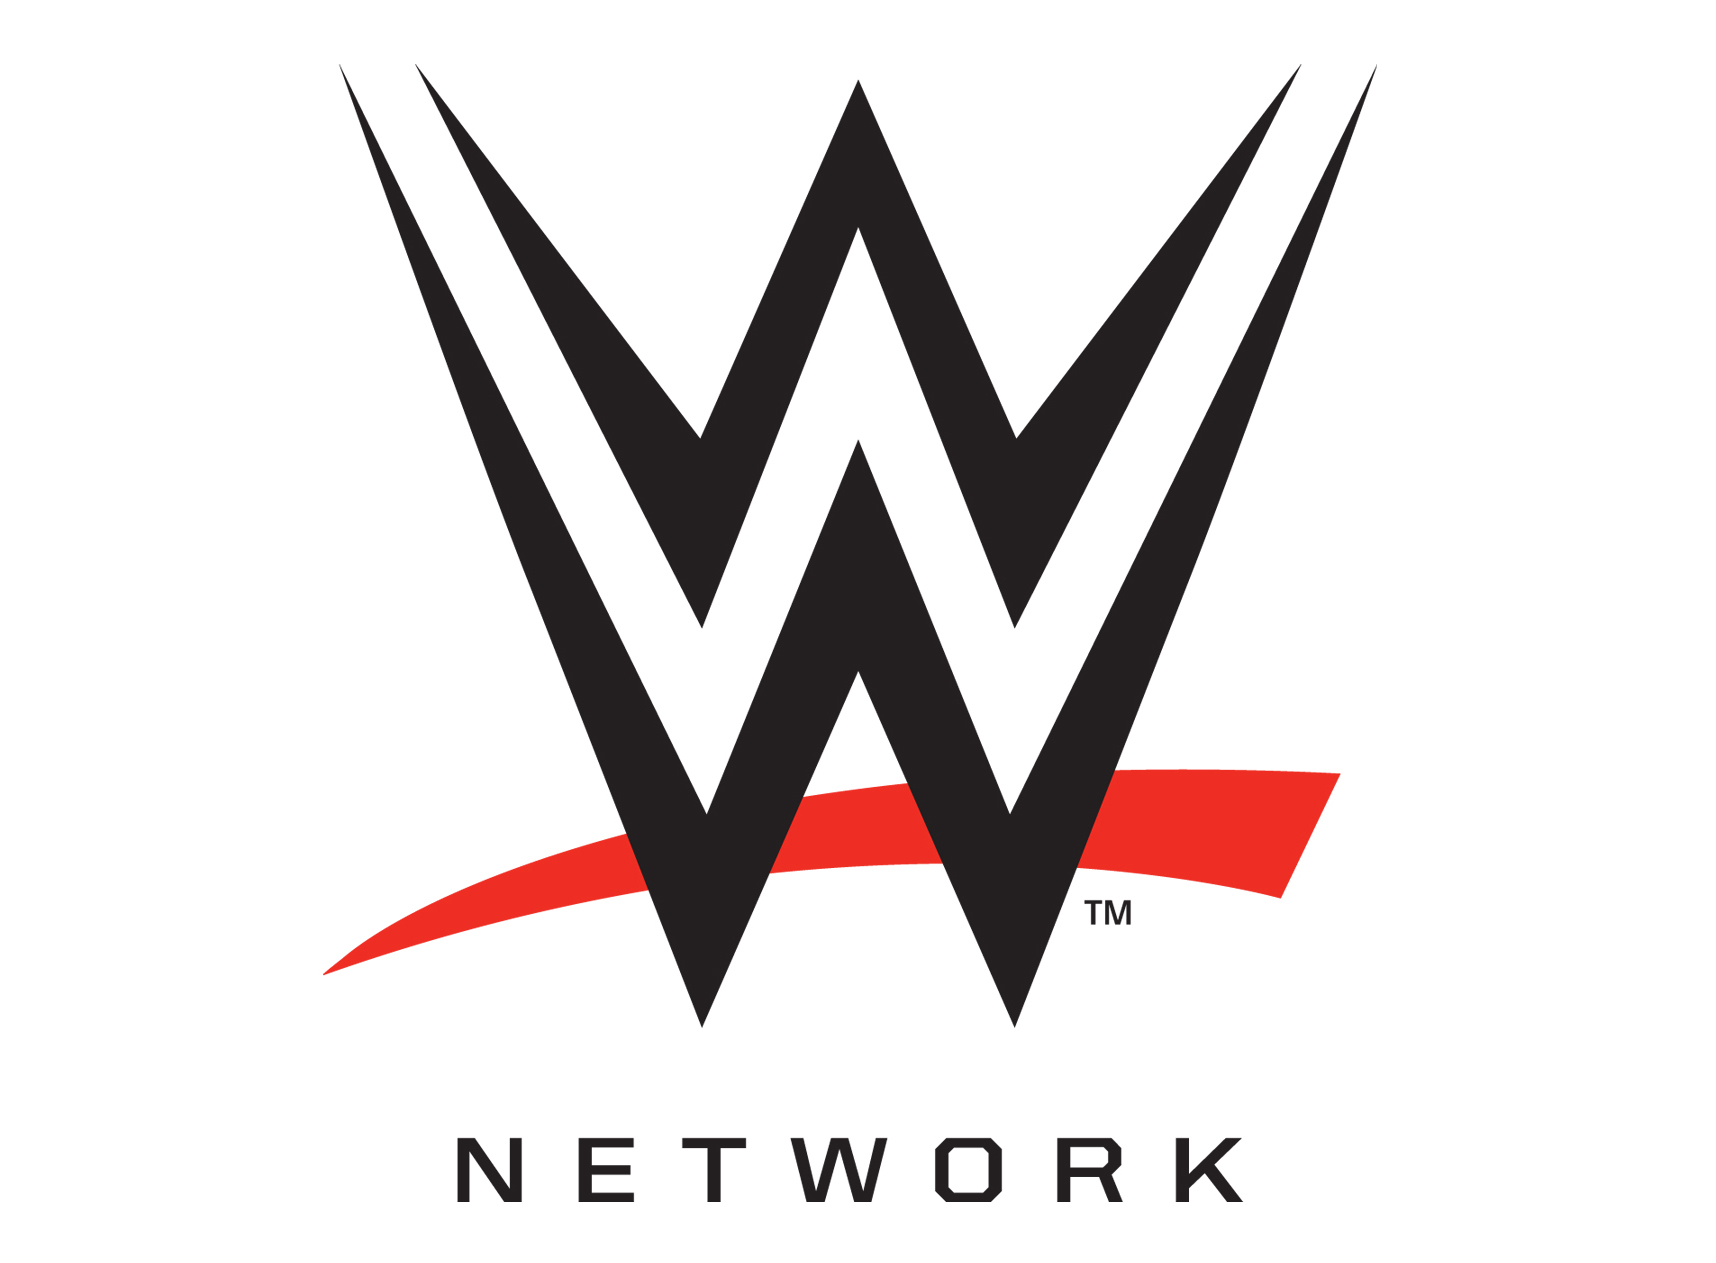 1000  images about wwe on Pin